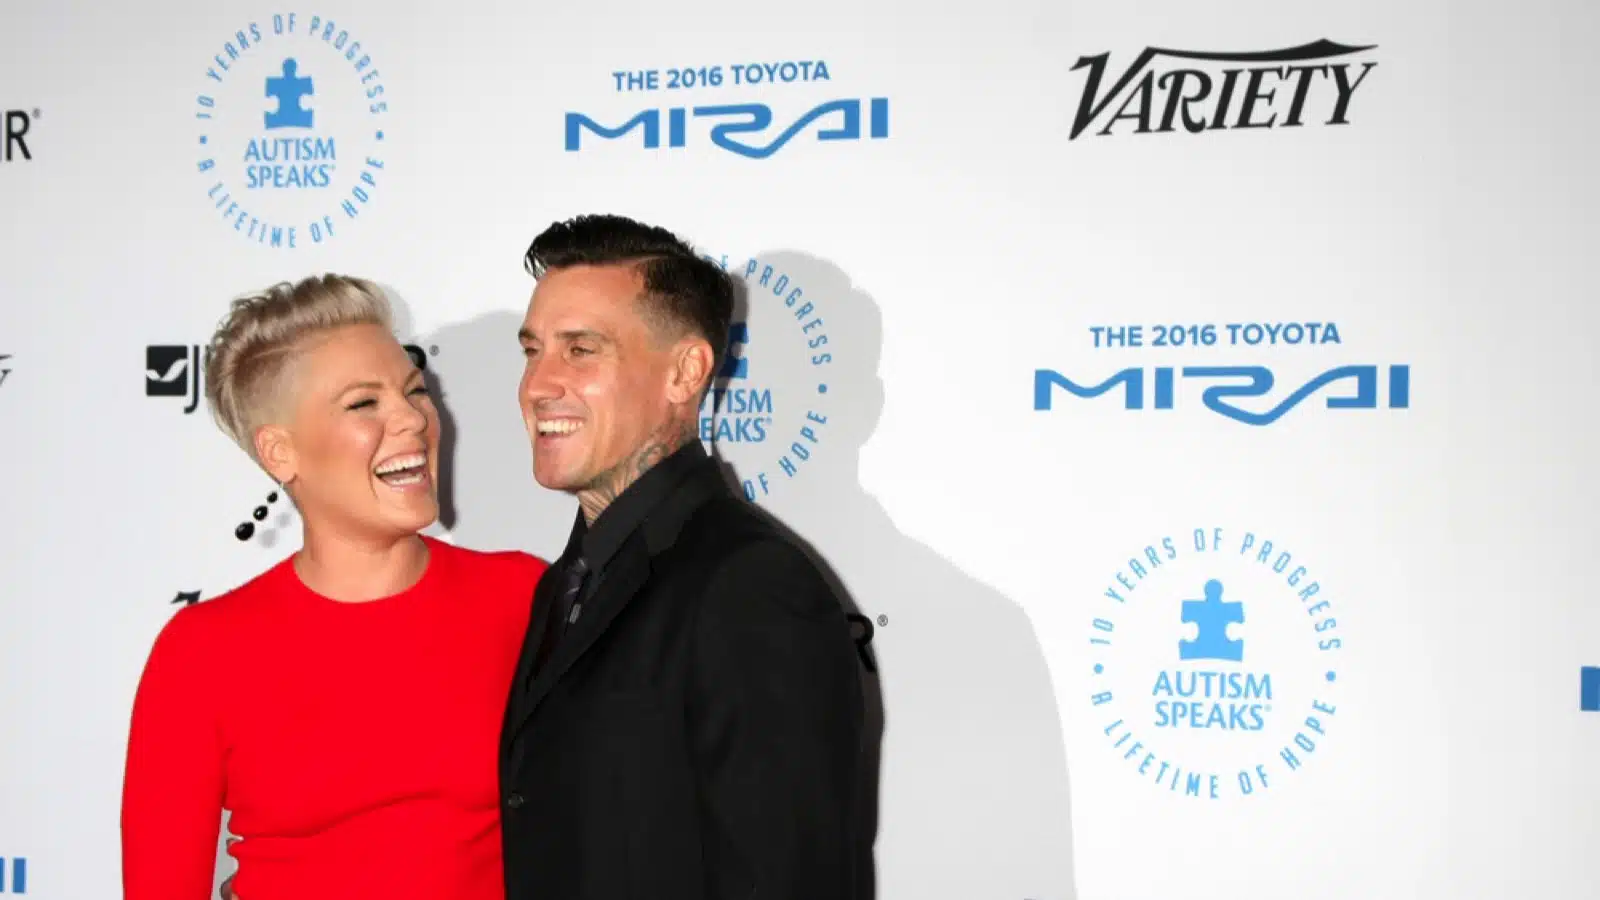 LOS ANGELES - OCT 8: Pink, Carey Hart at the Autism Speaks Celebrity Chef Gala at the Barker Hanger on October 8, 2015 in Santa Monica, CA